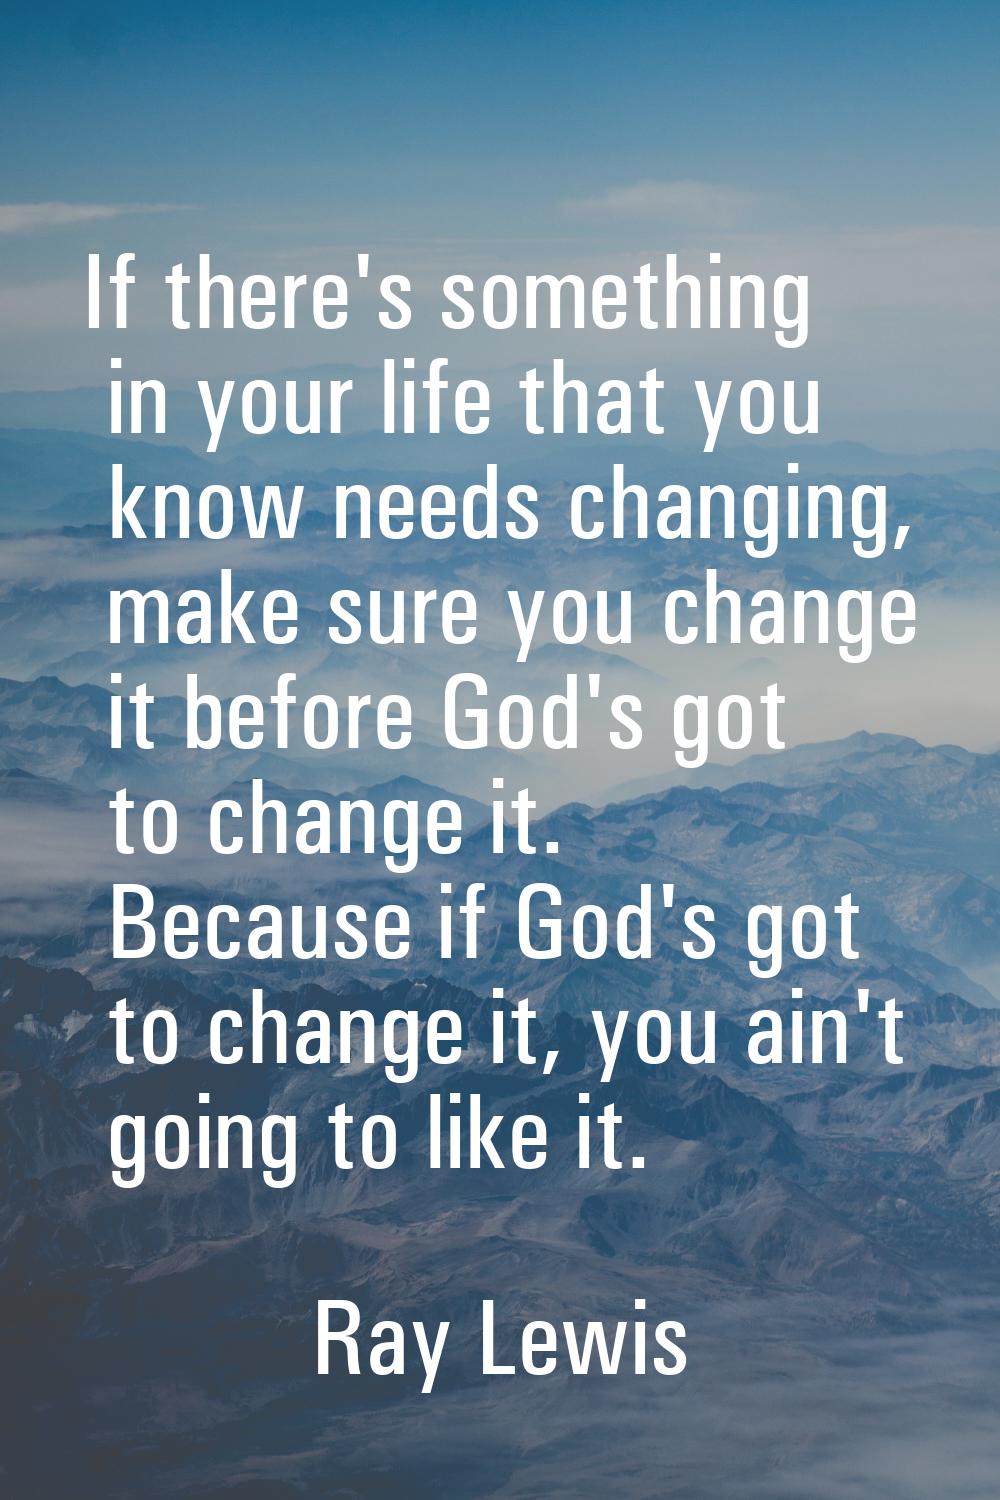 If there's something in your life that you know needs changing, make sure you change it before God'